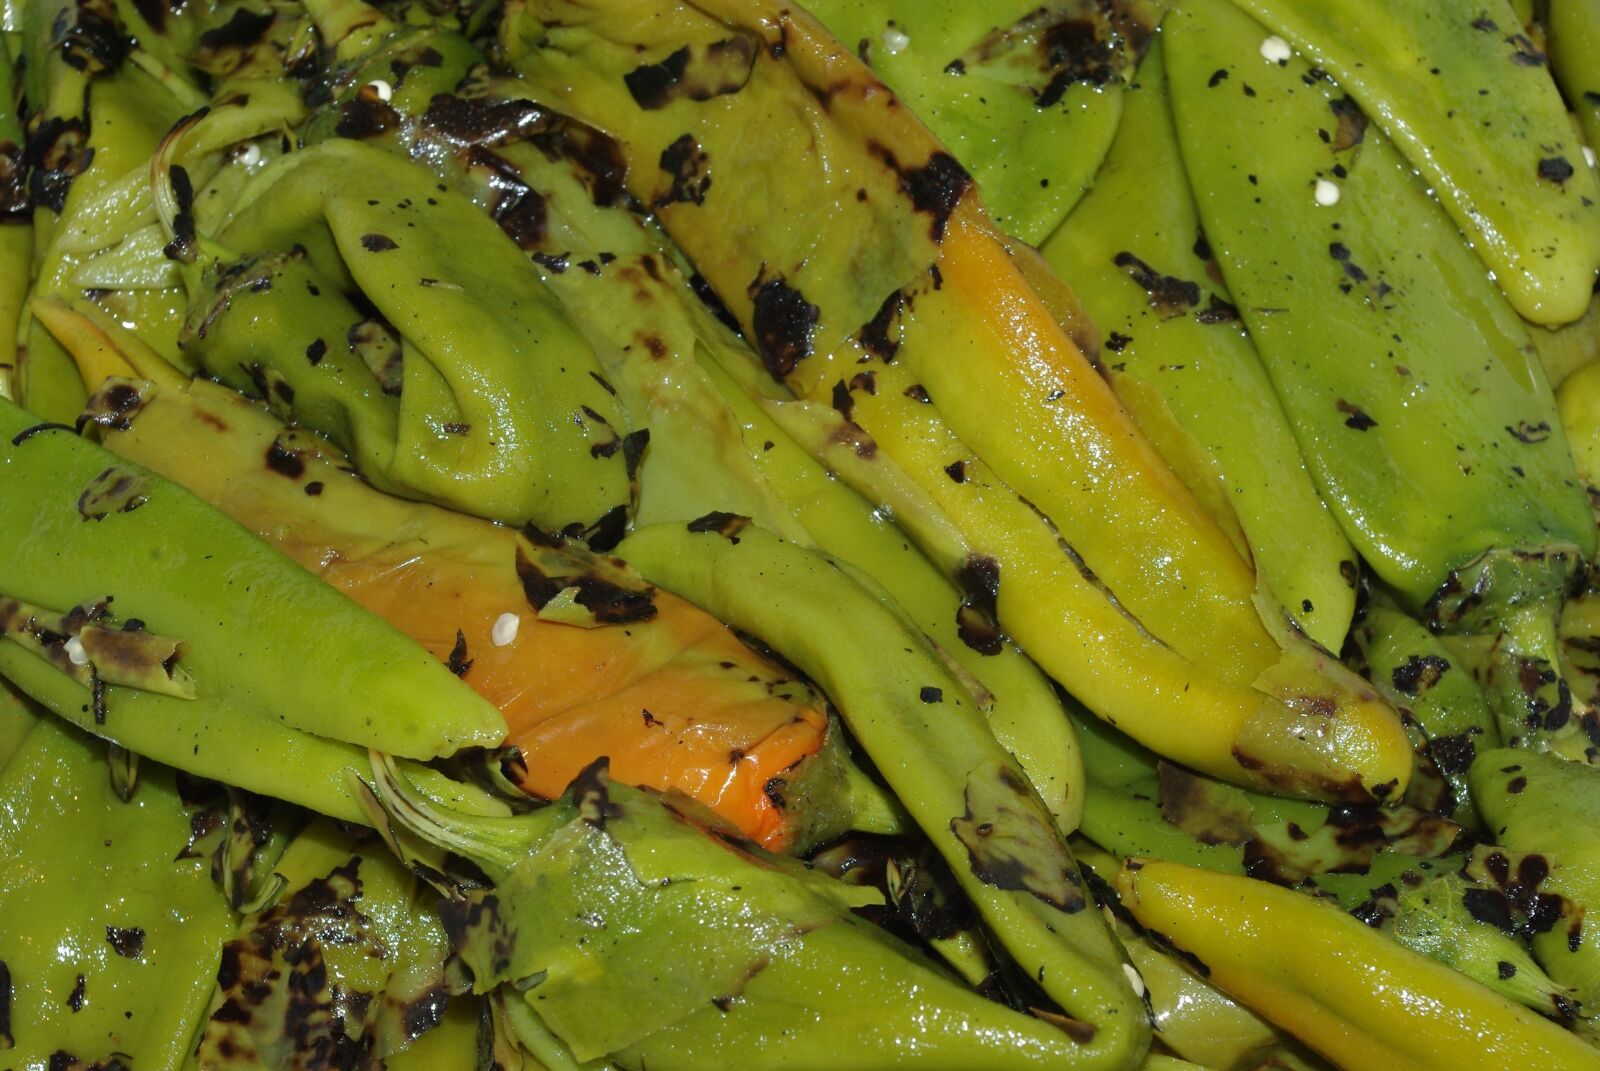 Pentax K-m (K2000) sample photo. Green chilies, spices, food photography